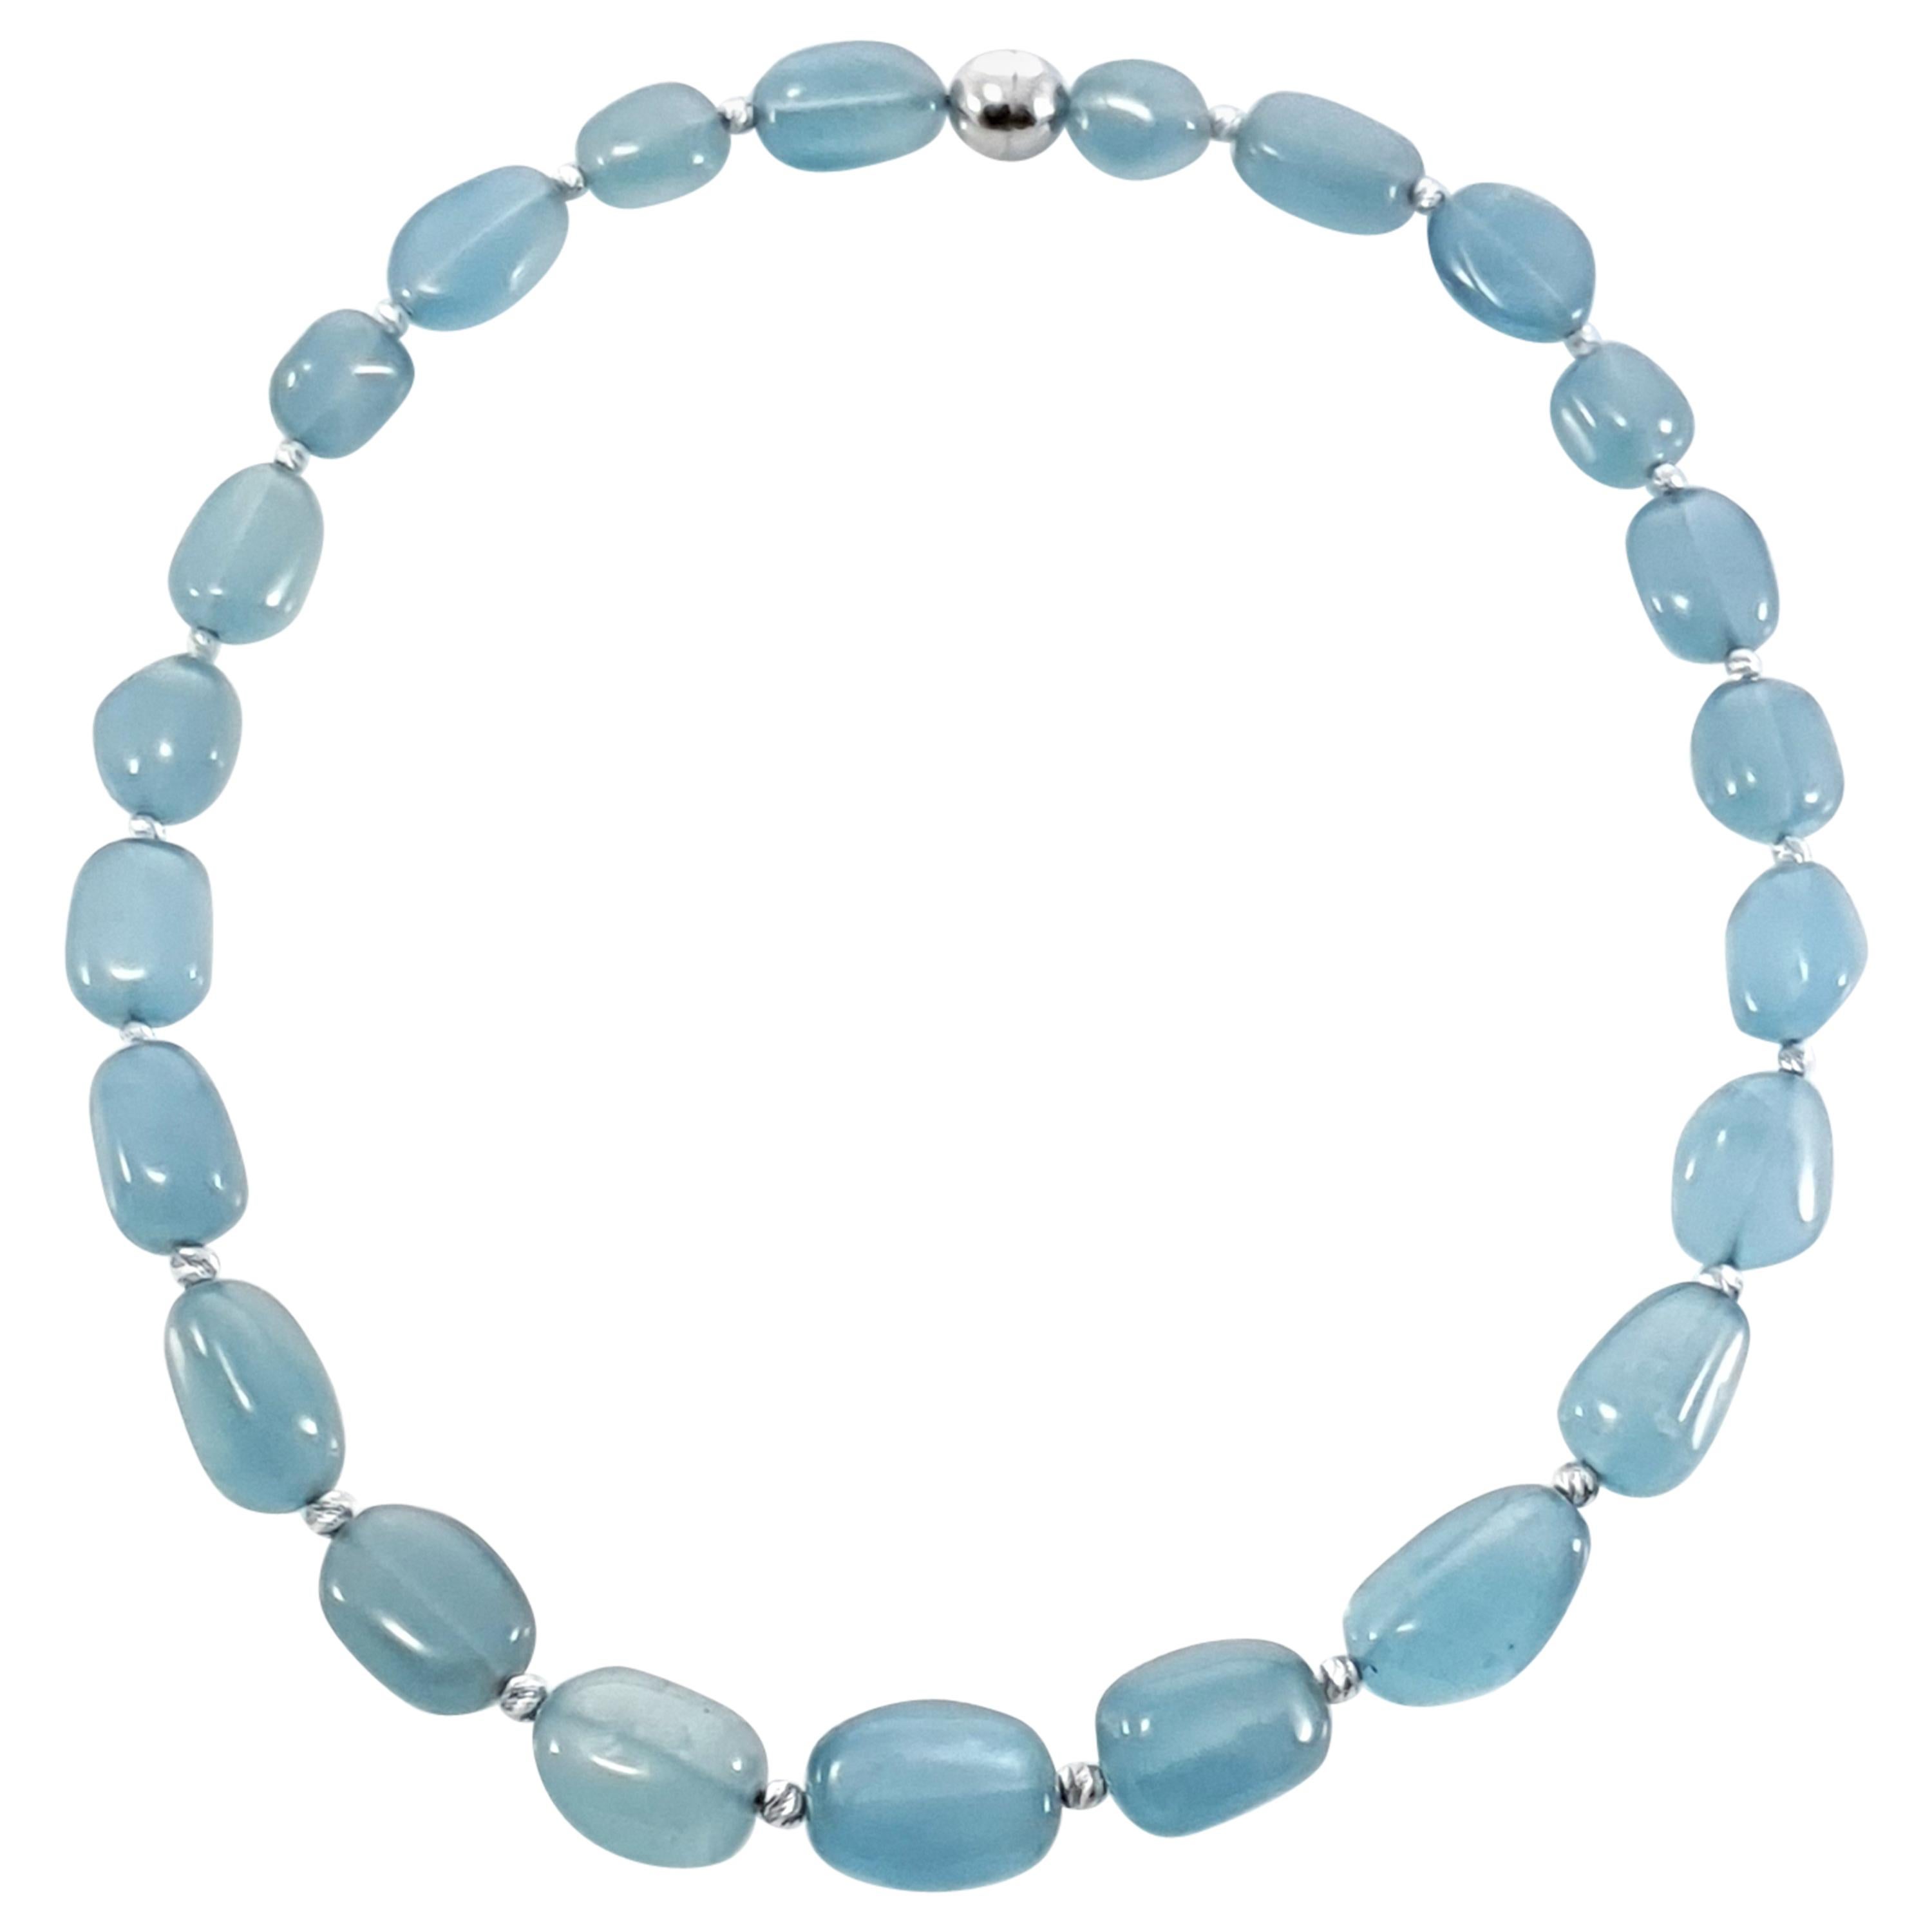 Milky Blue Aquamarine Baroque Beaded Necklace with 18kt White Gold For Sale